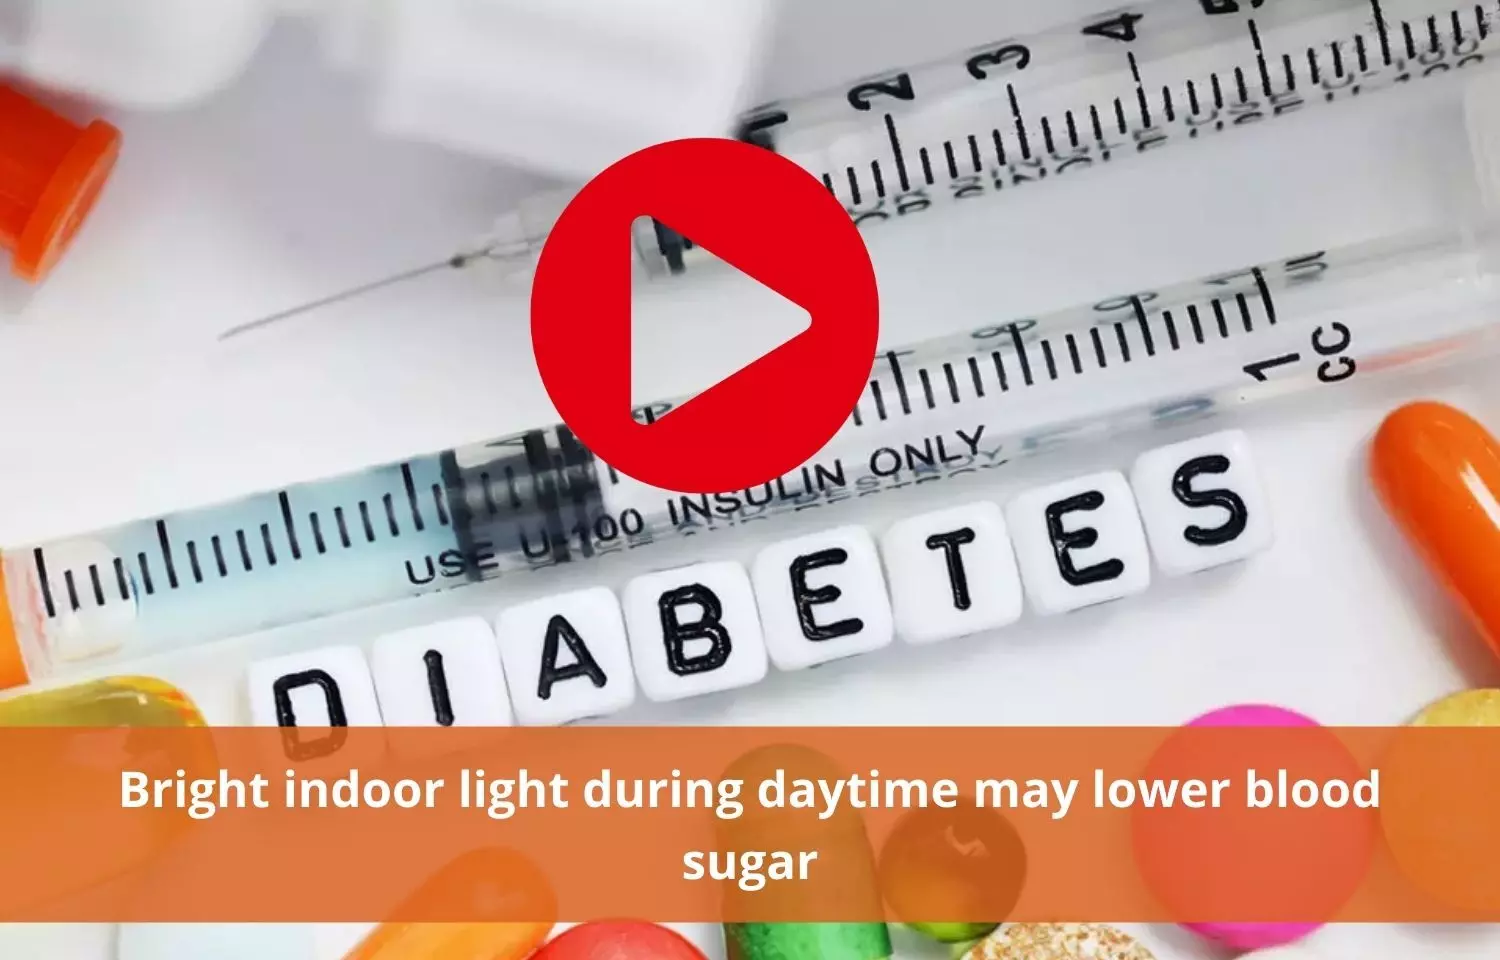 Indoor bright light received during daytime significantly reduces blood sugar